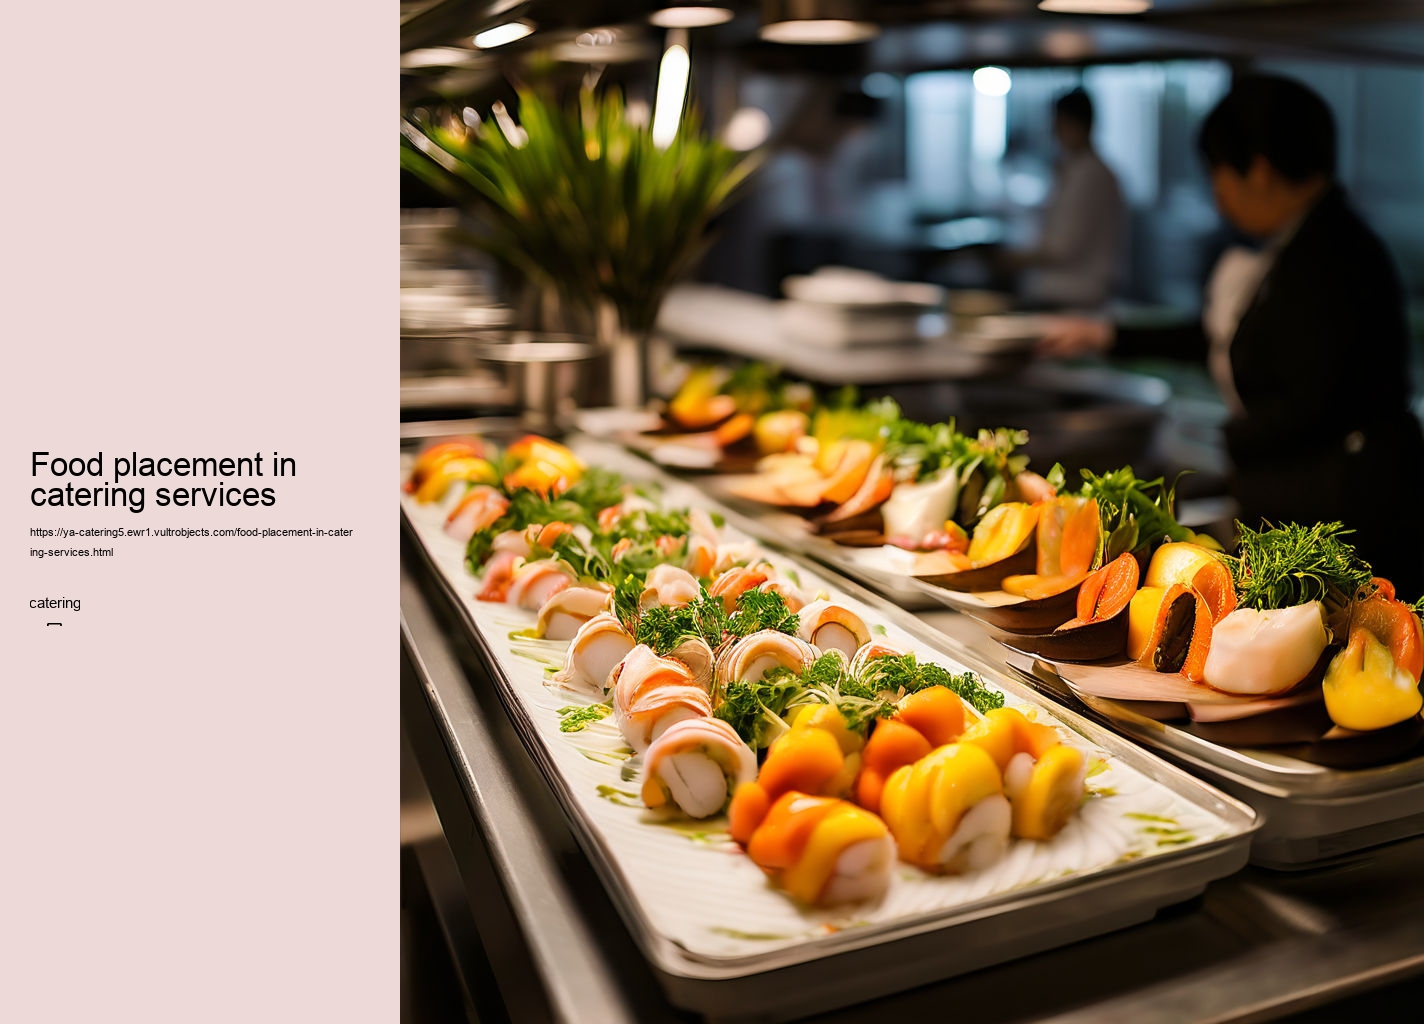 Food placement in catering services